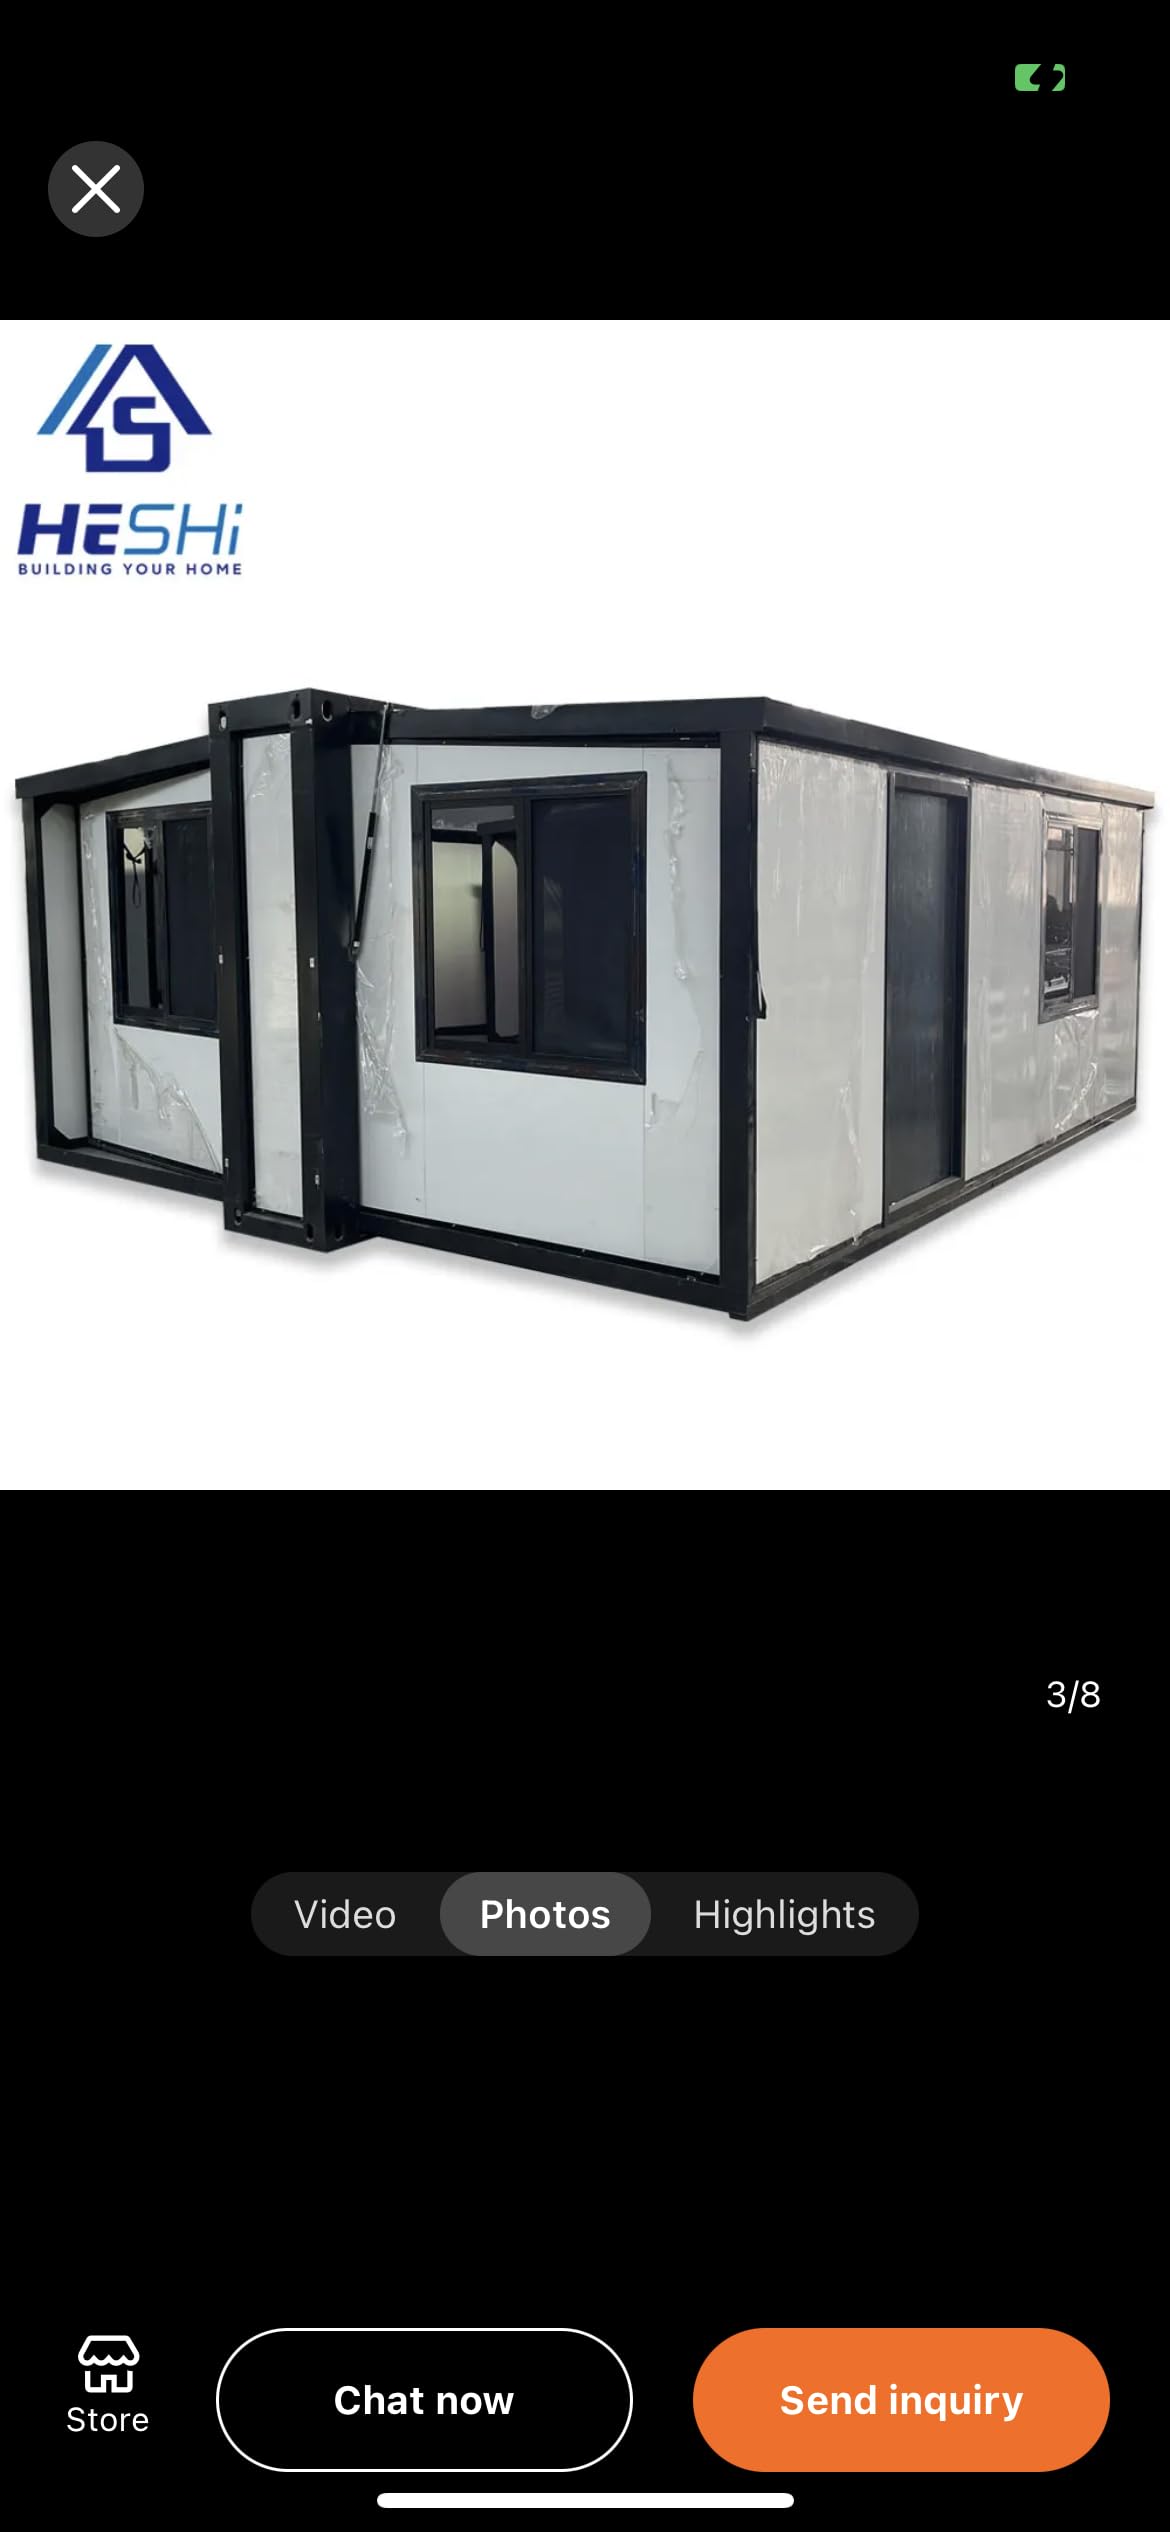 brotherhood13OFFICER OWLOFFICER OWL (20 X 20ft) Modern Foldable House to Live in, Tiny Home Kit Prefab House, Suitable for A Variety of Purposes, Our Container House is Built to Last,A Variety of P…